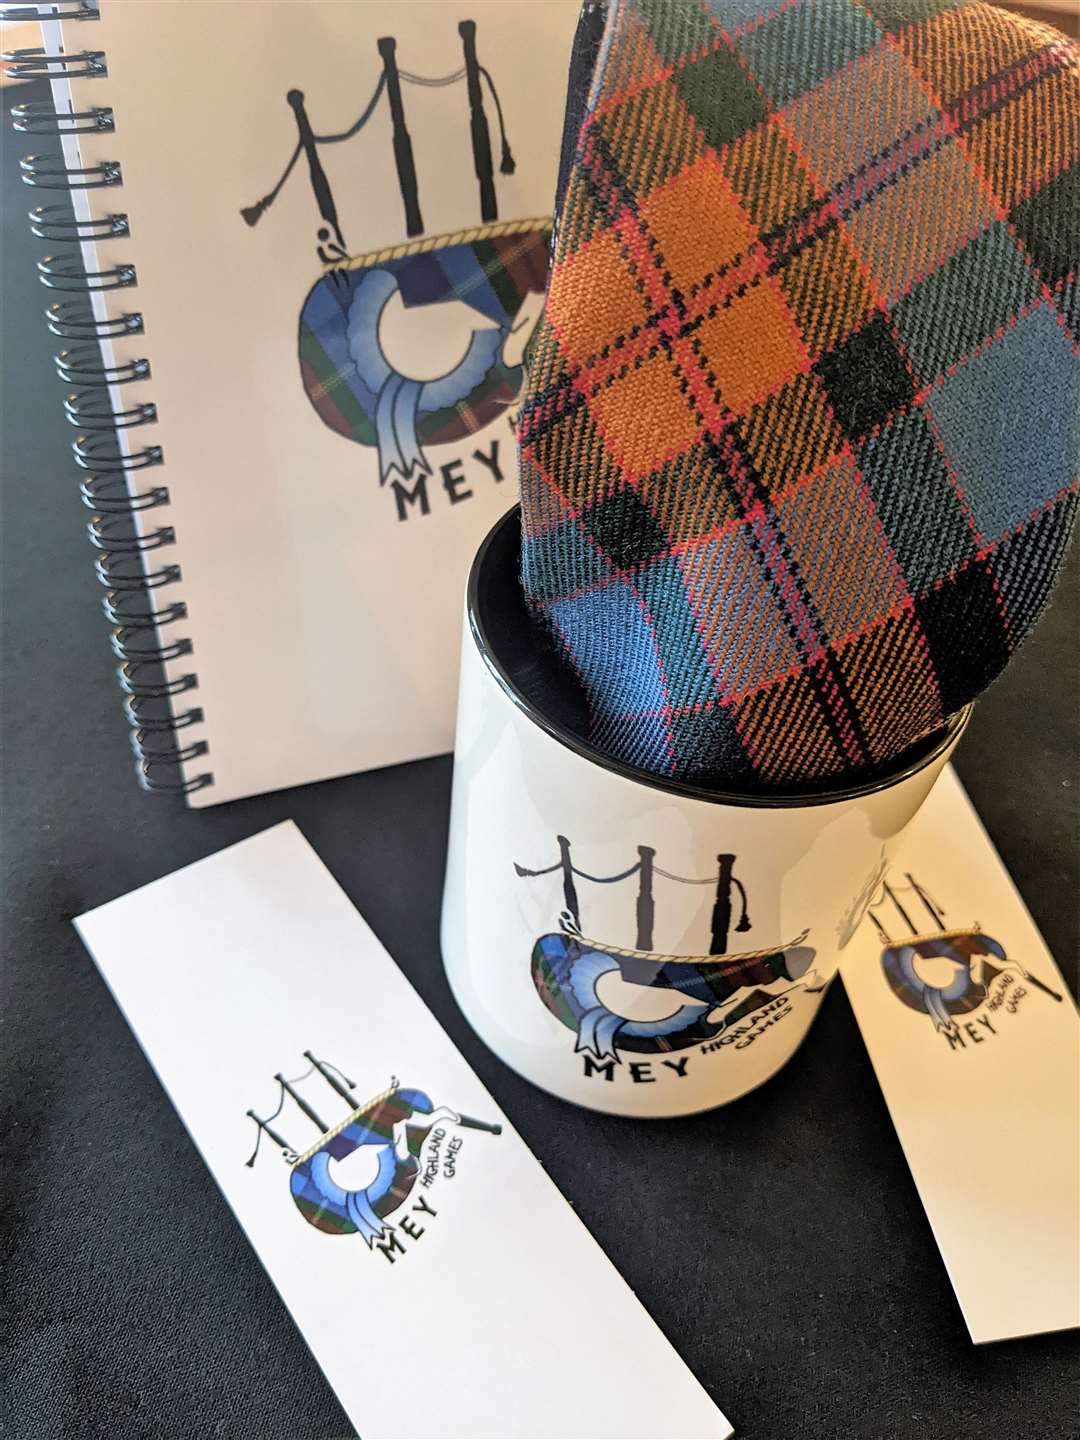 Mey Games returns this year after cancellations due to Covid in 2020 and 2021. A new Mey Games tartan has been produced and will officially launch at the event on August 6th.